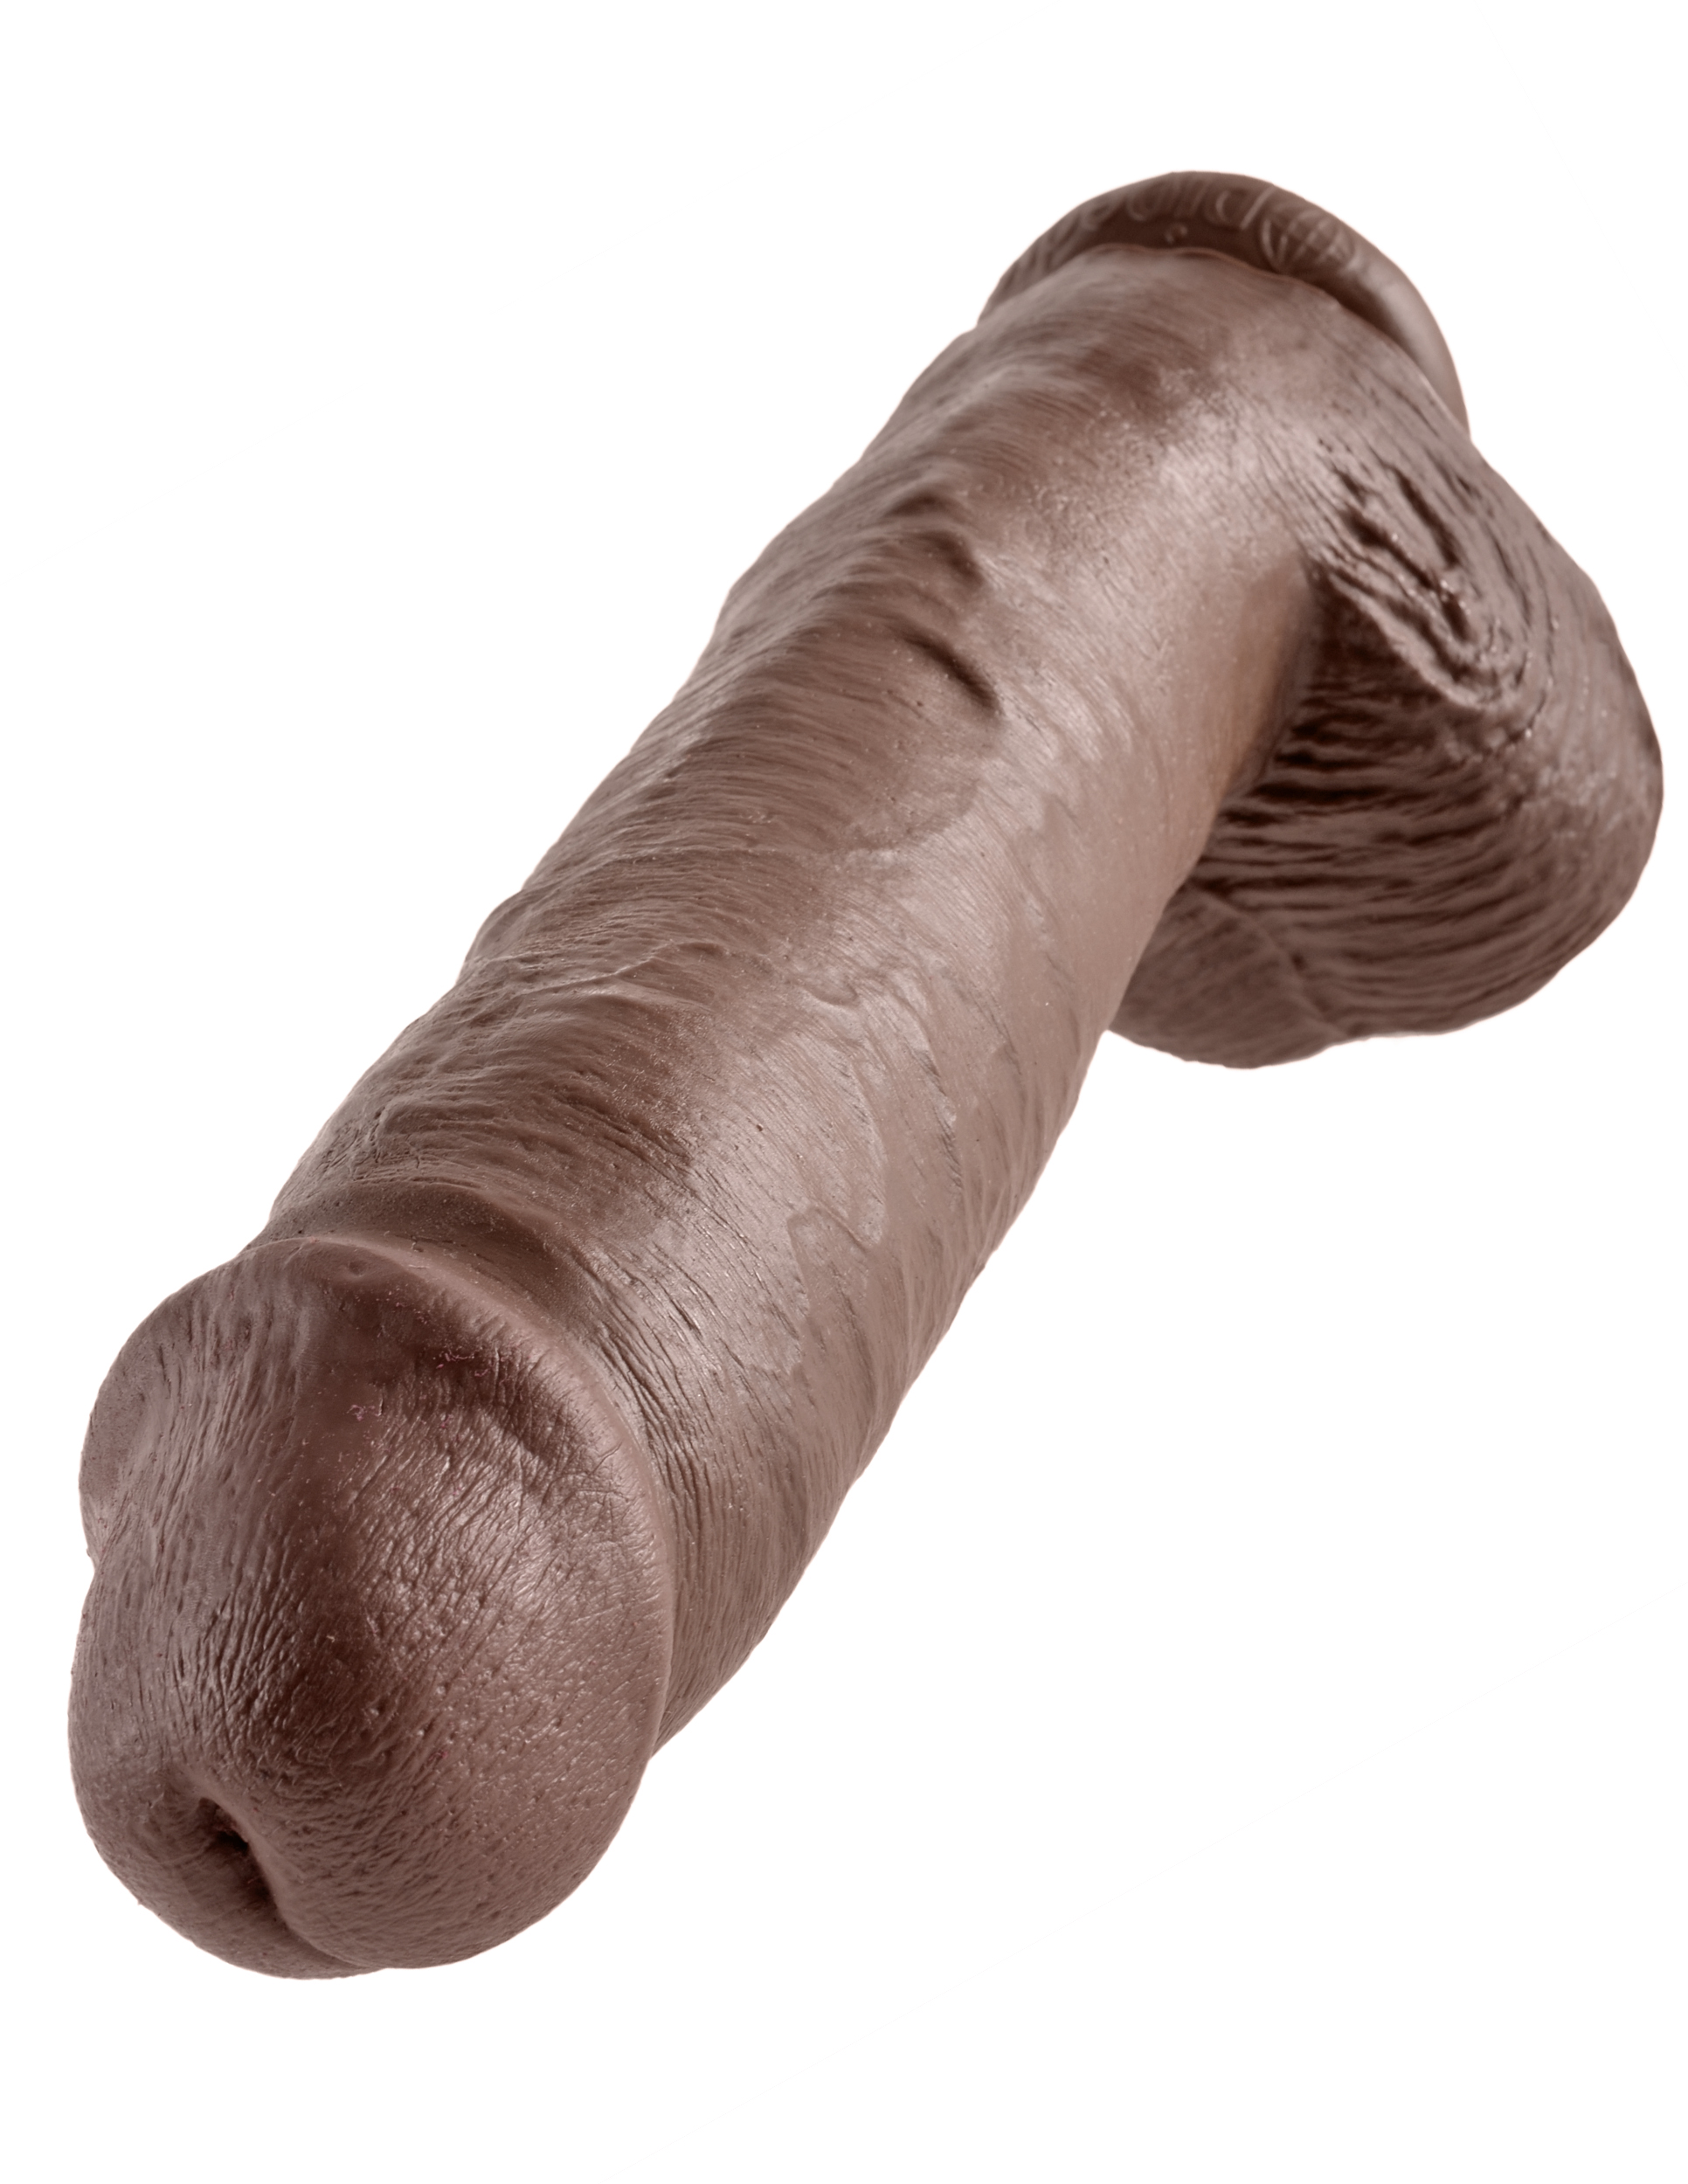 KING COCK 11IN COCK W/BALLS BROWN  